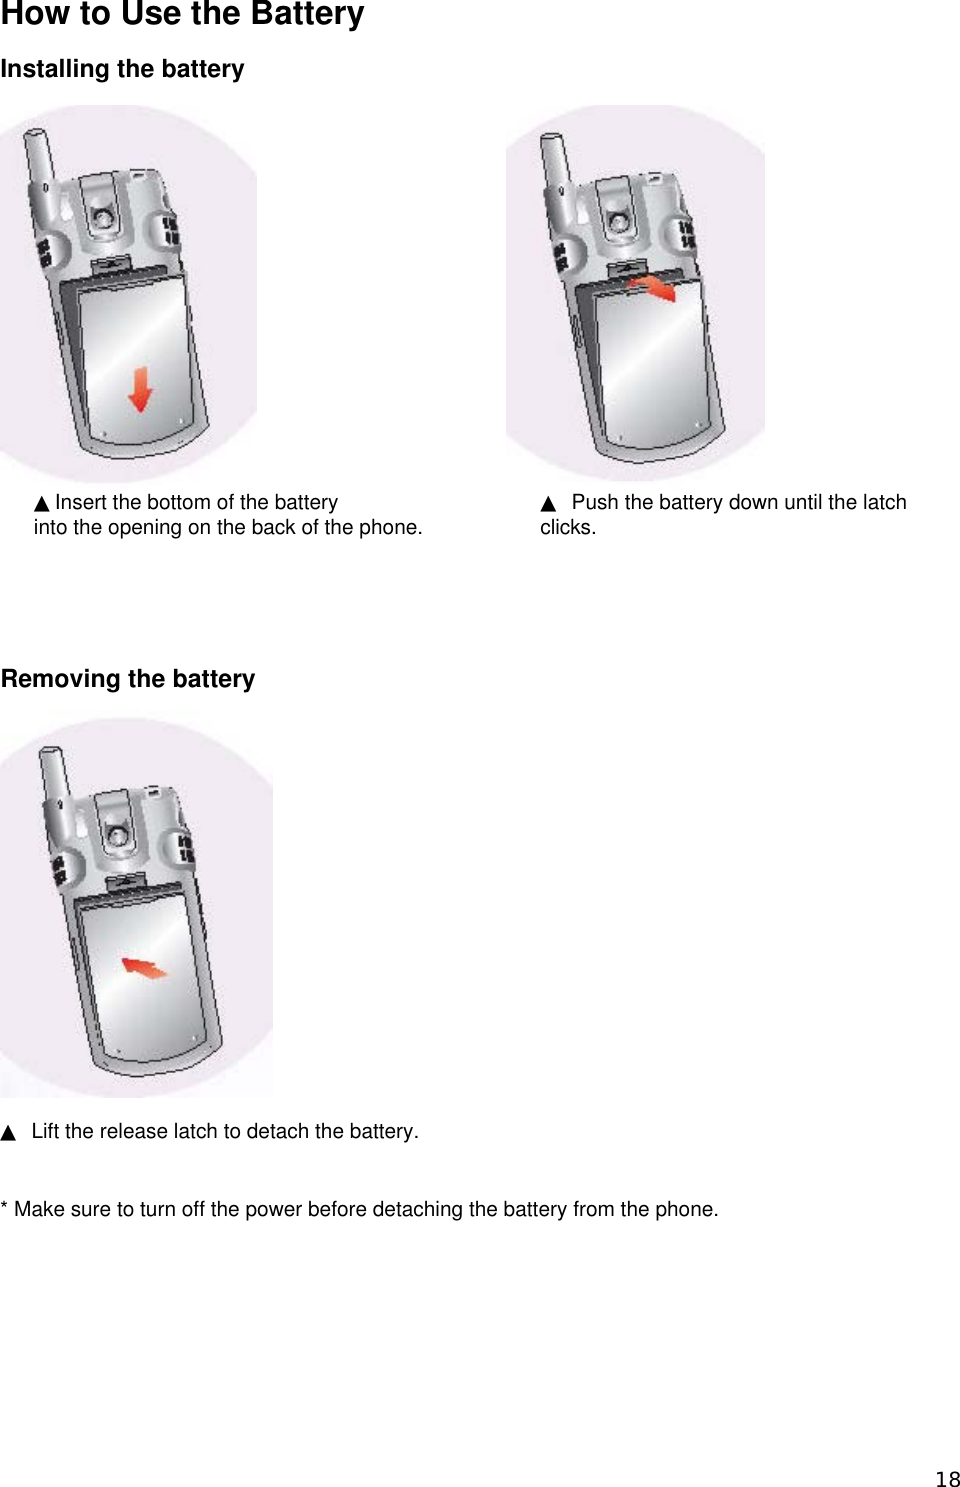 How to Use the Battery  Installing the battery            ▲ Push the battery down until the latch clicks.  ▲Insert the bottom of the battery   into the opening on the back of the phone.      Removing the battery  ▲  Lift the release latch to detach the battery.    * Make sure to turn off the power before detaching the battery from the phone.      18